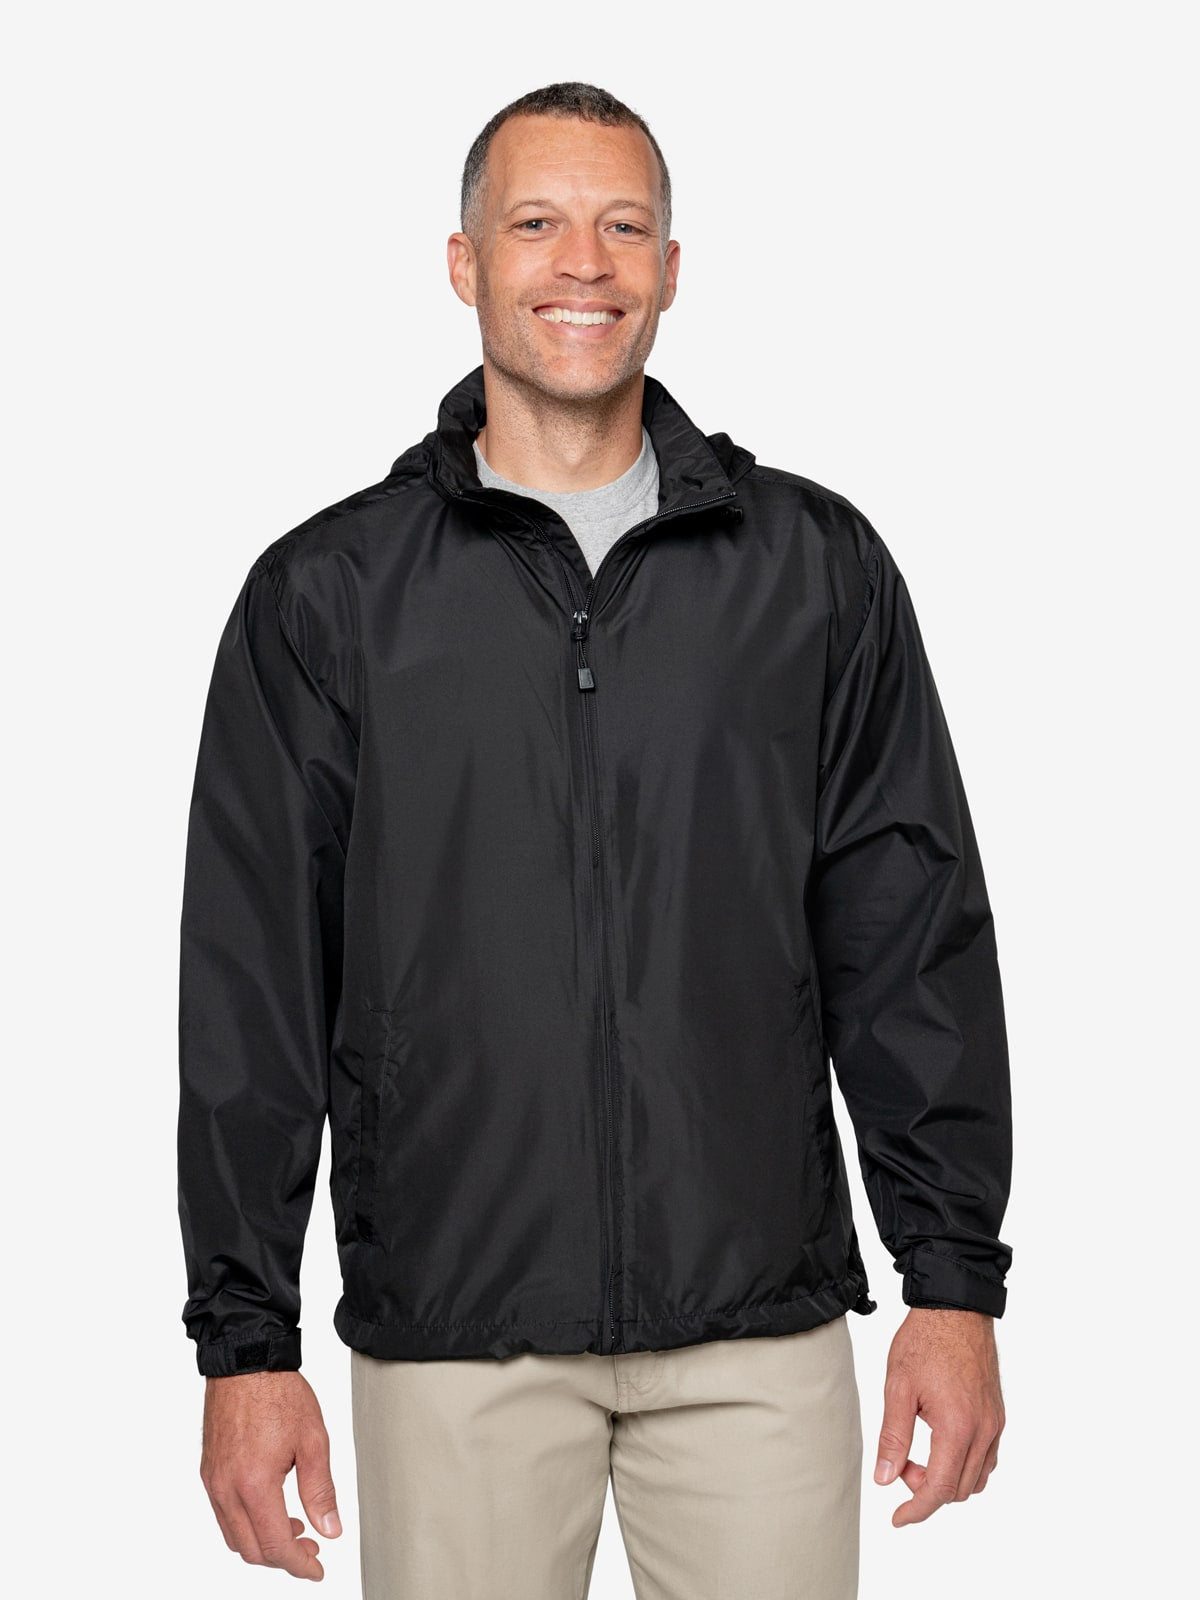 Men's Insect Repellent Jackets and Outerwear – Insect Shield